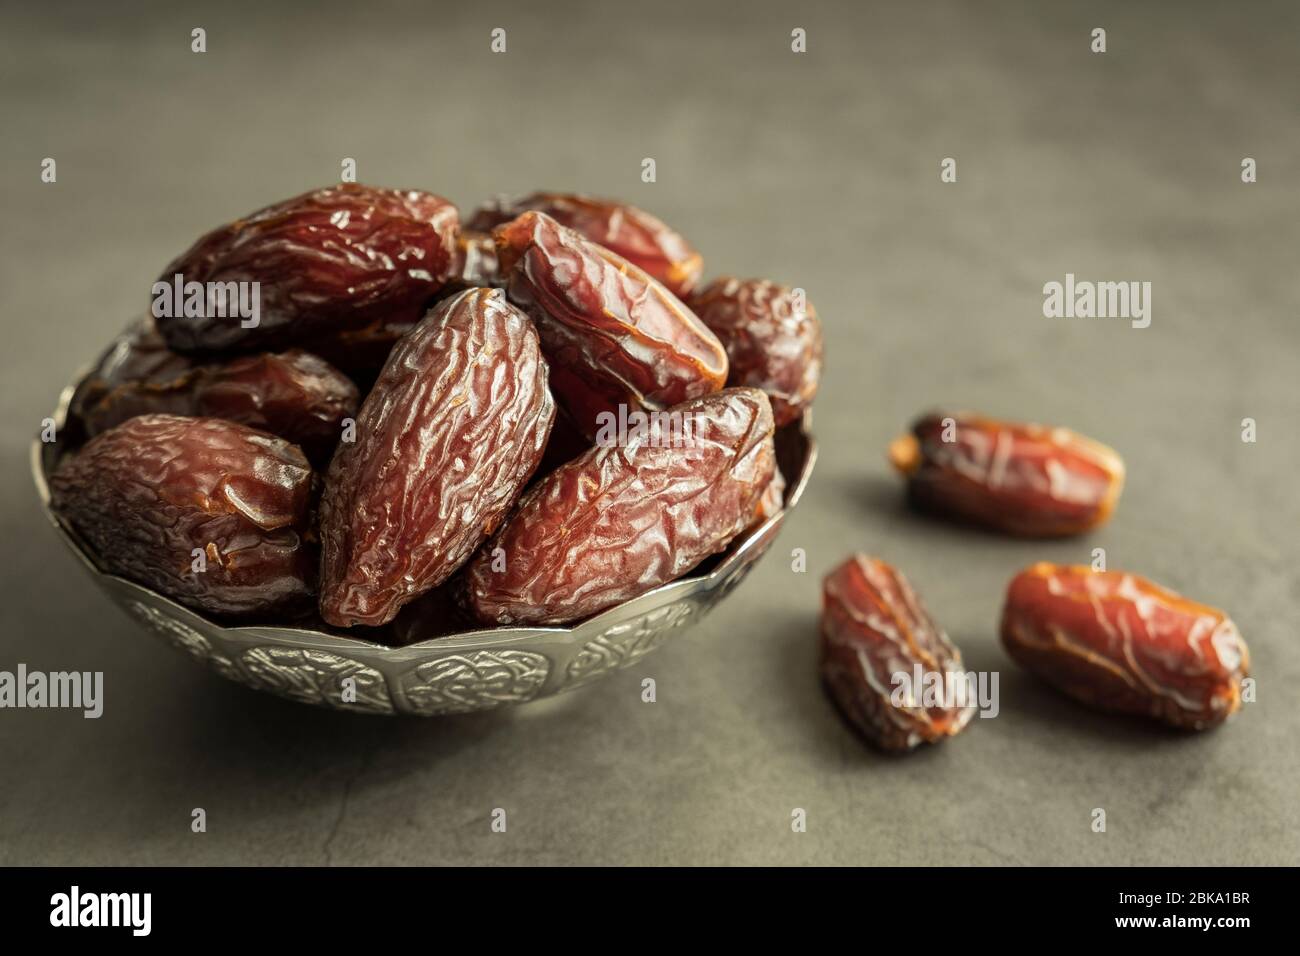 Raw date fruit ready to eat in silver bowl on concrete background. Traditional, delicious and healthy ramadan food. Stock Photo